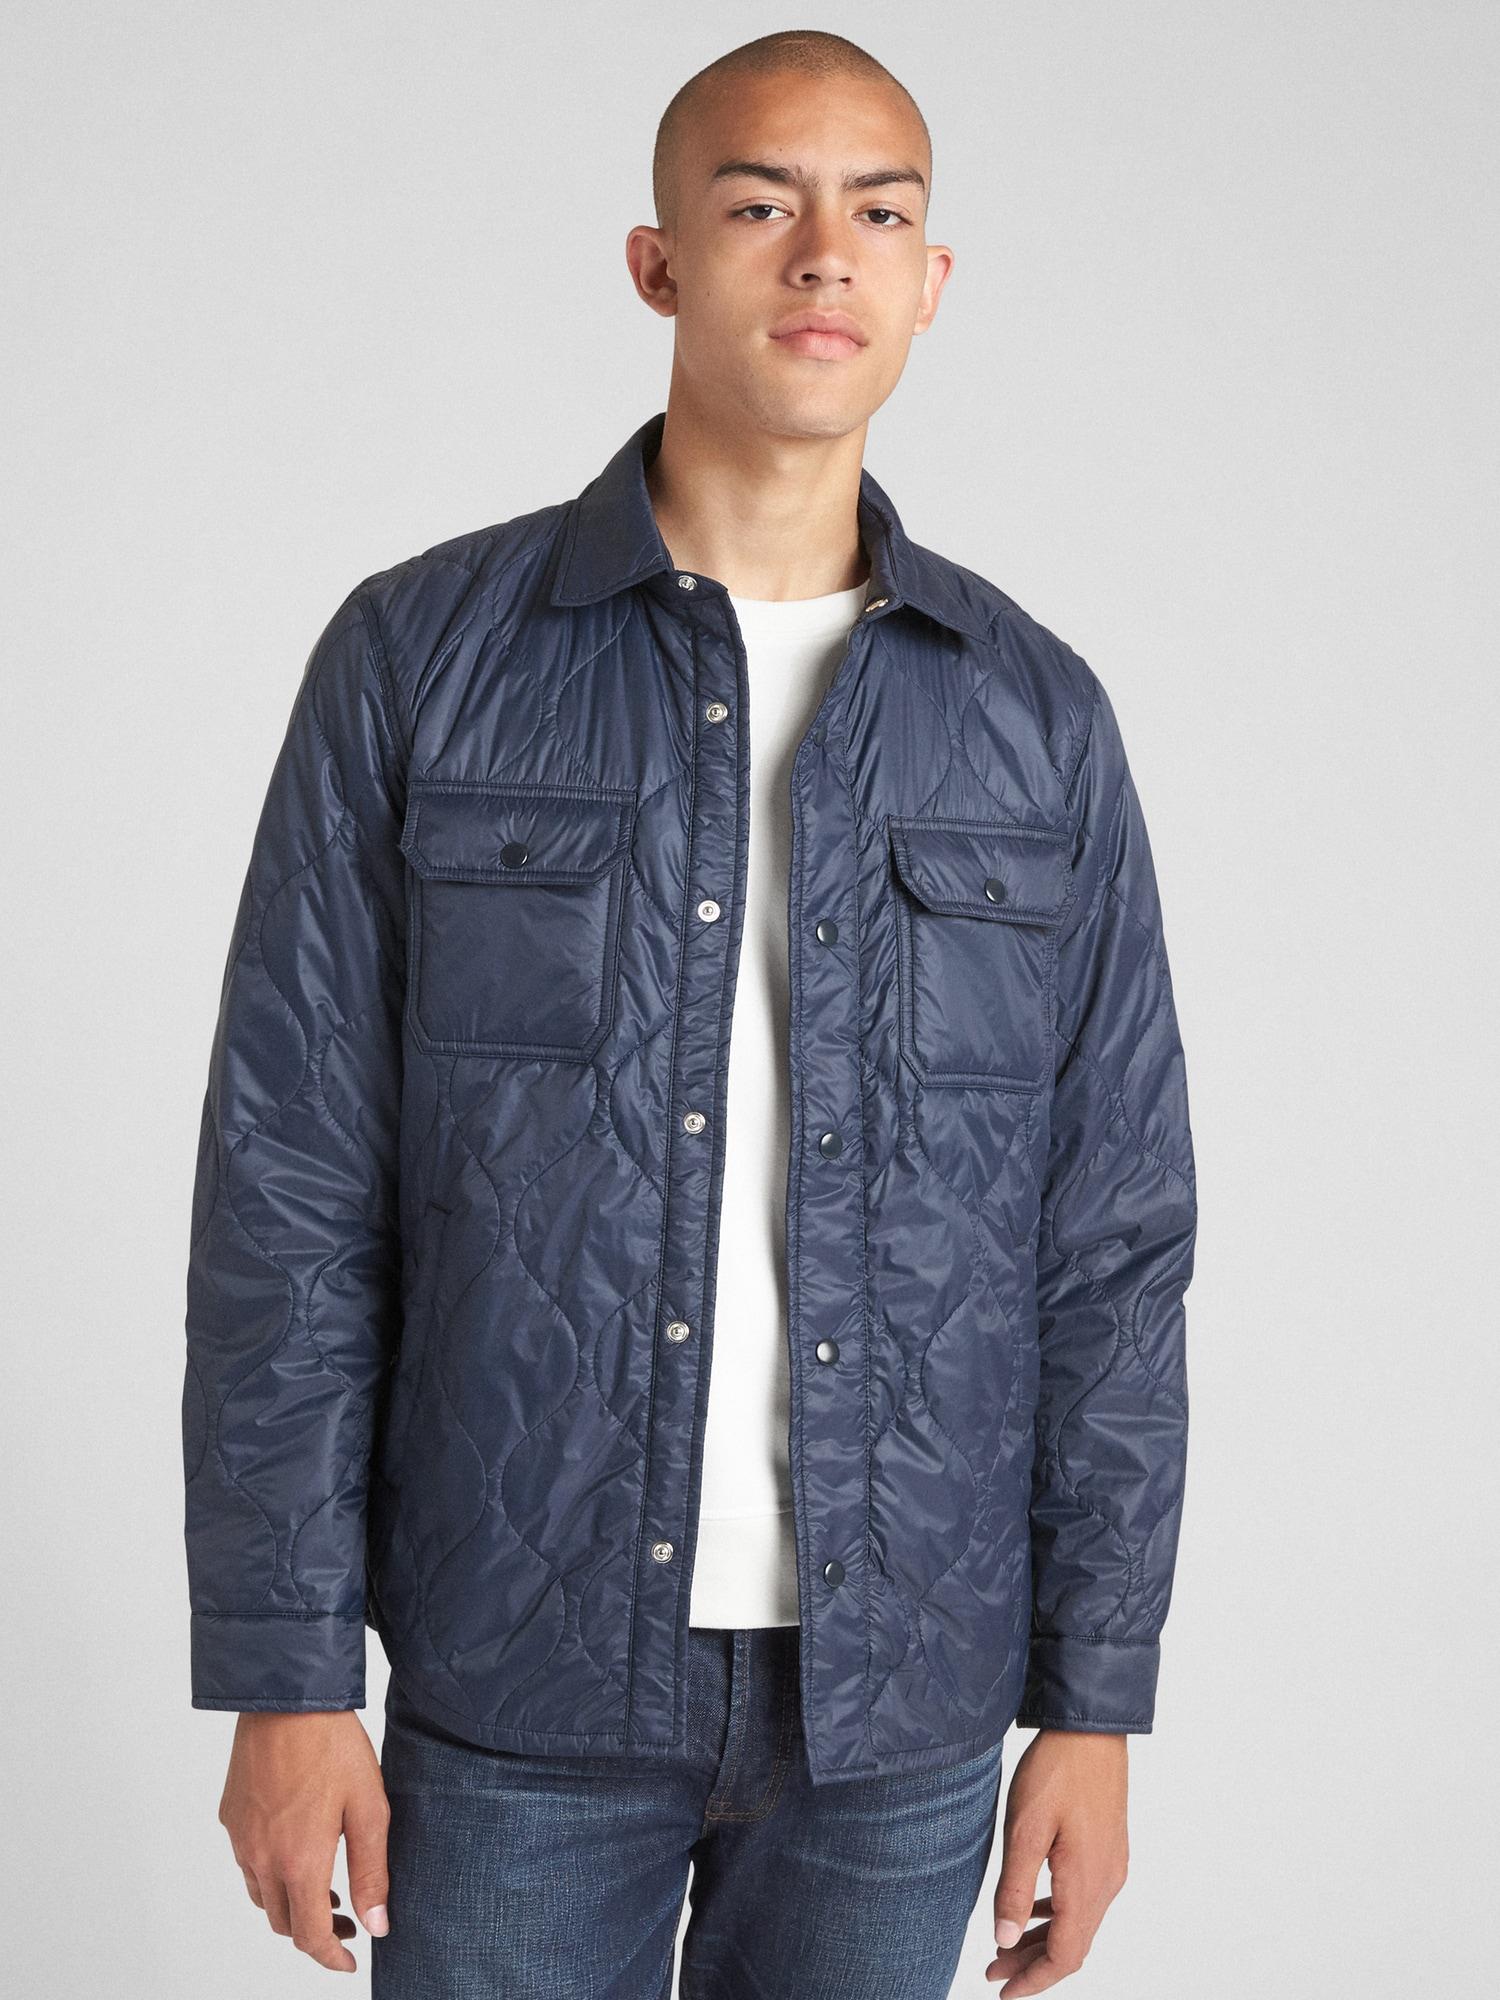 gap quilted shirt jacket